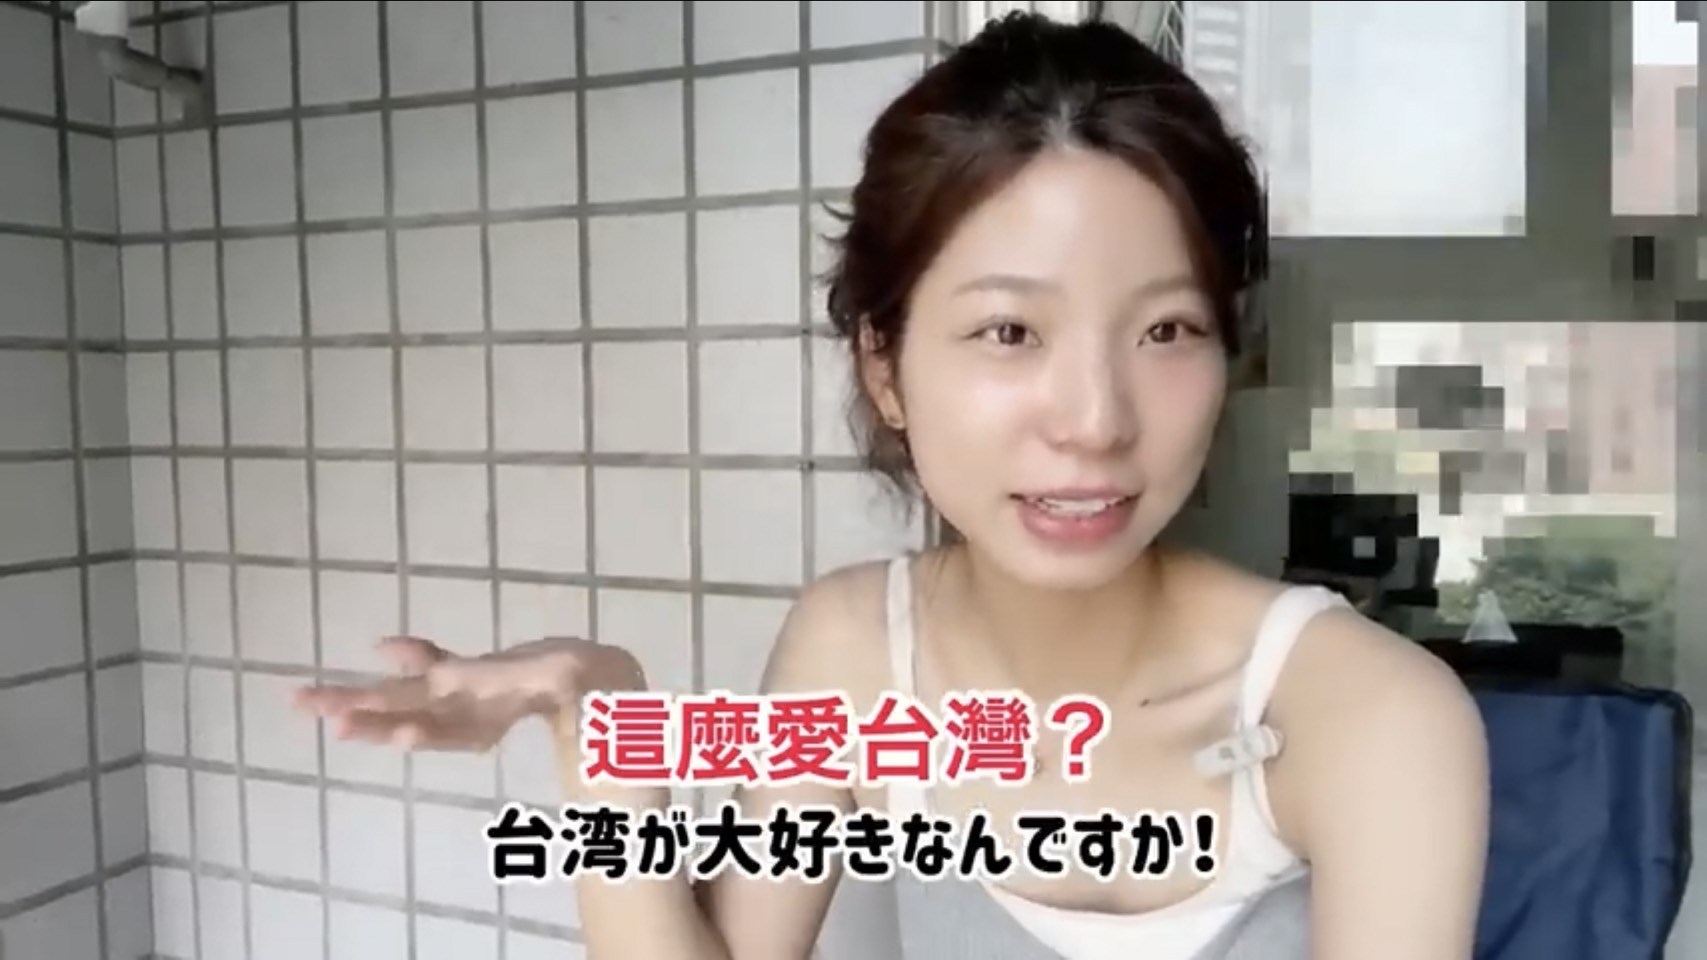 Nana, a New Immigrant from Japan, shared the reasons why she adores Taiwan.  Video authorization from：日本人娜娜